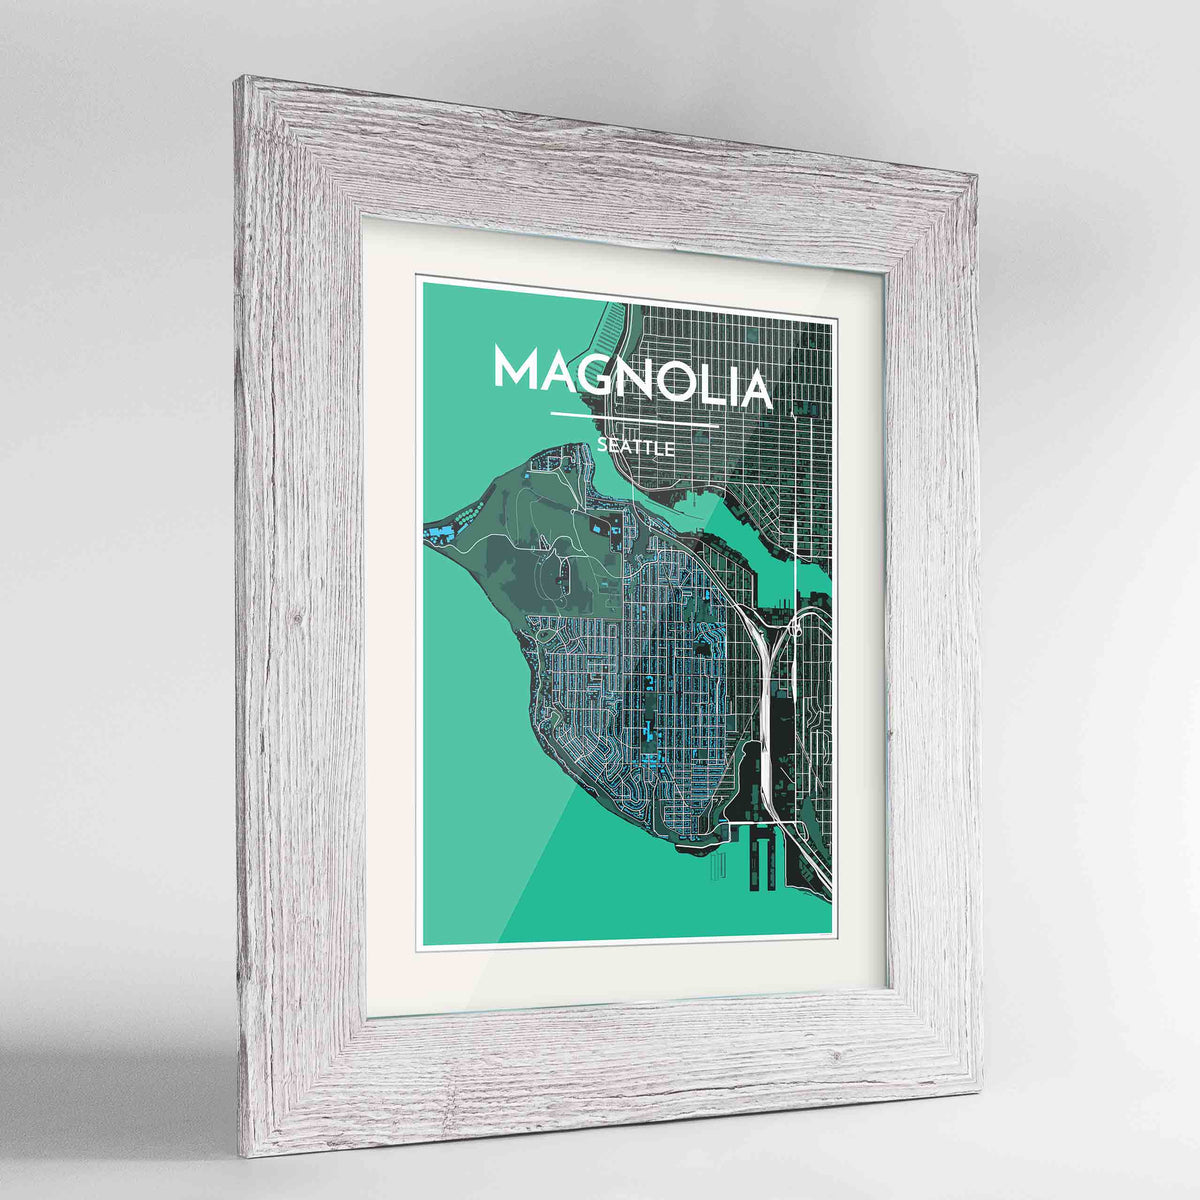 Framed Seattle Magnolia Neighbourhood Map Art Print 24x36&quot; Western White frame Point Two Design Group